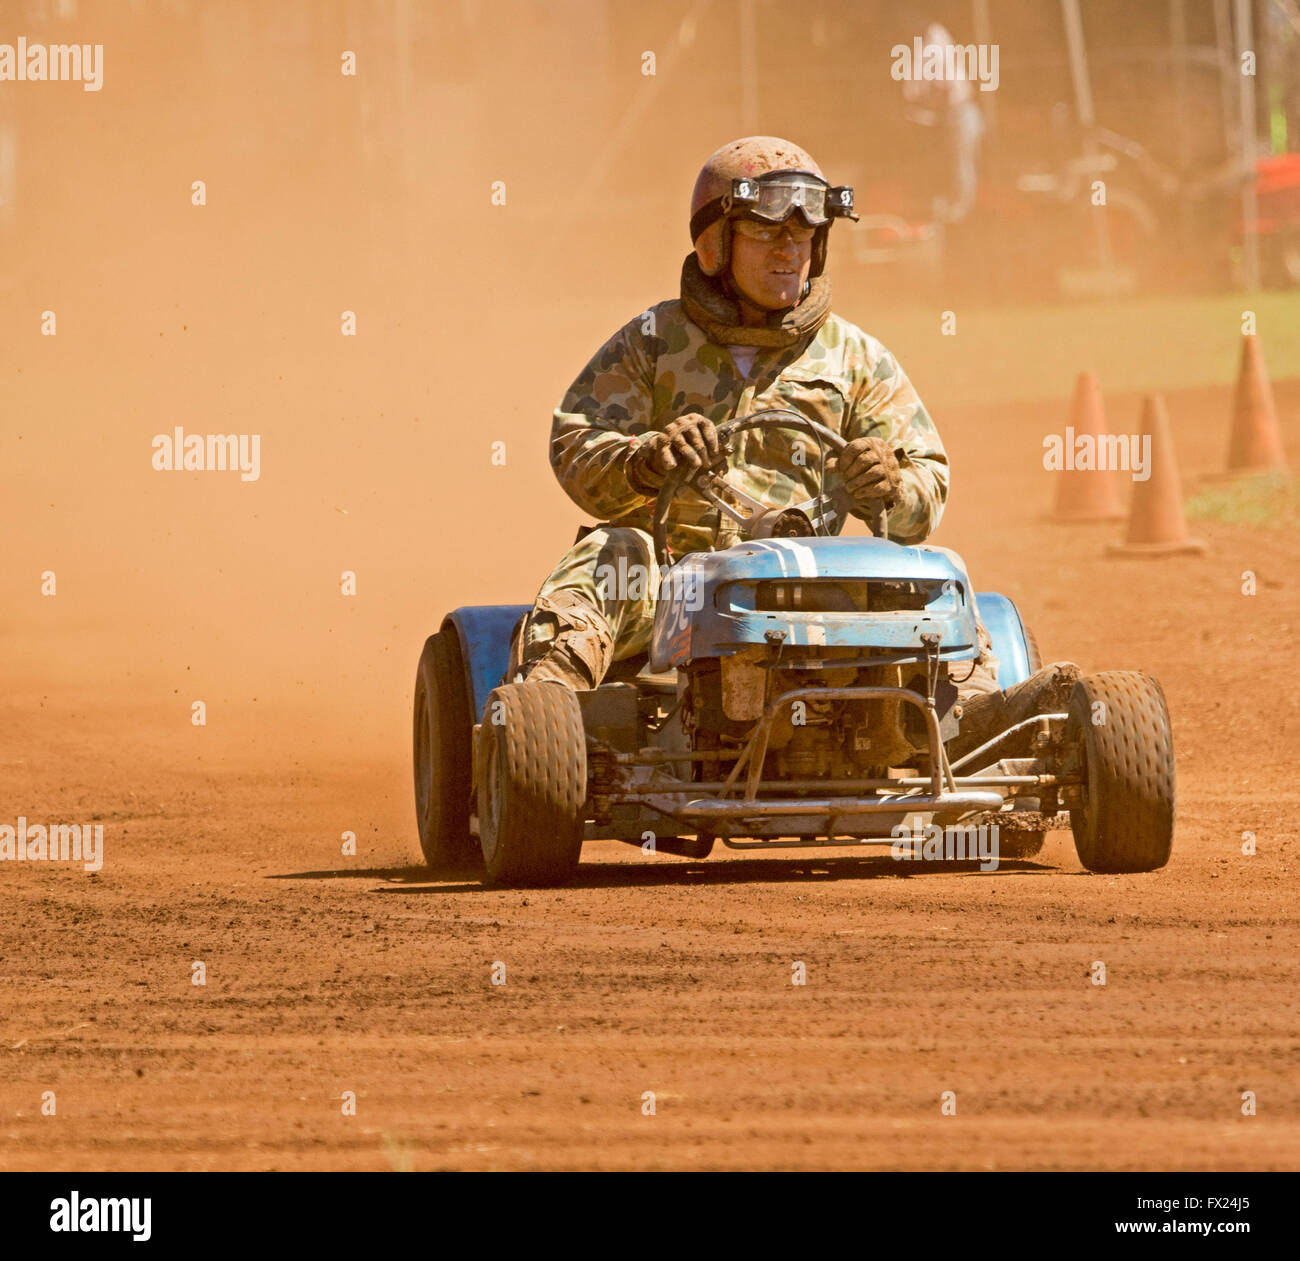 Man with helmet & overalls driving motor mower emerging from cloud of red dust on track in unusual Australian motor racing sport Stock Photo